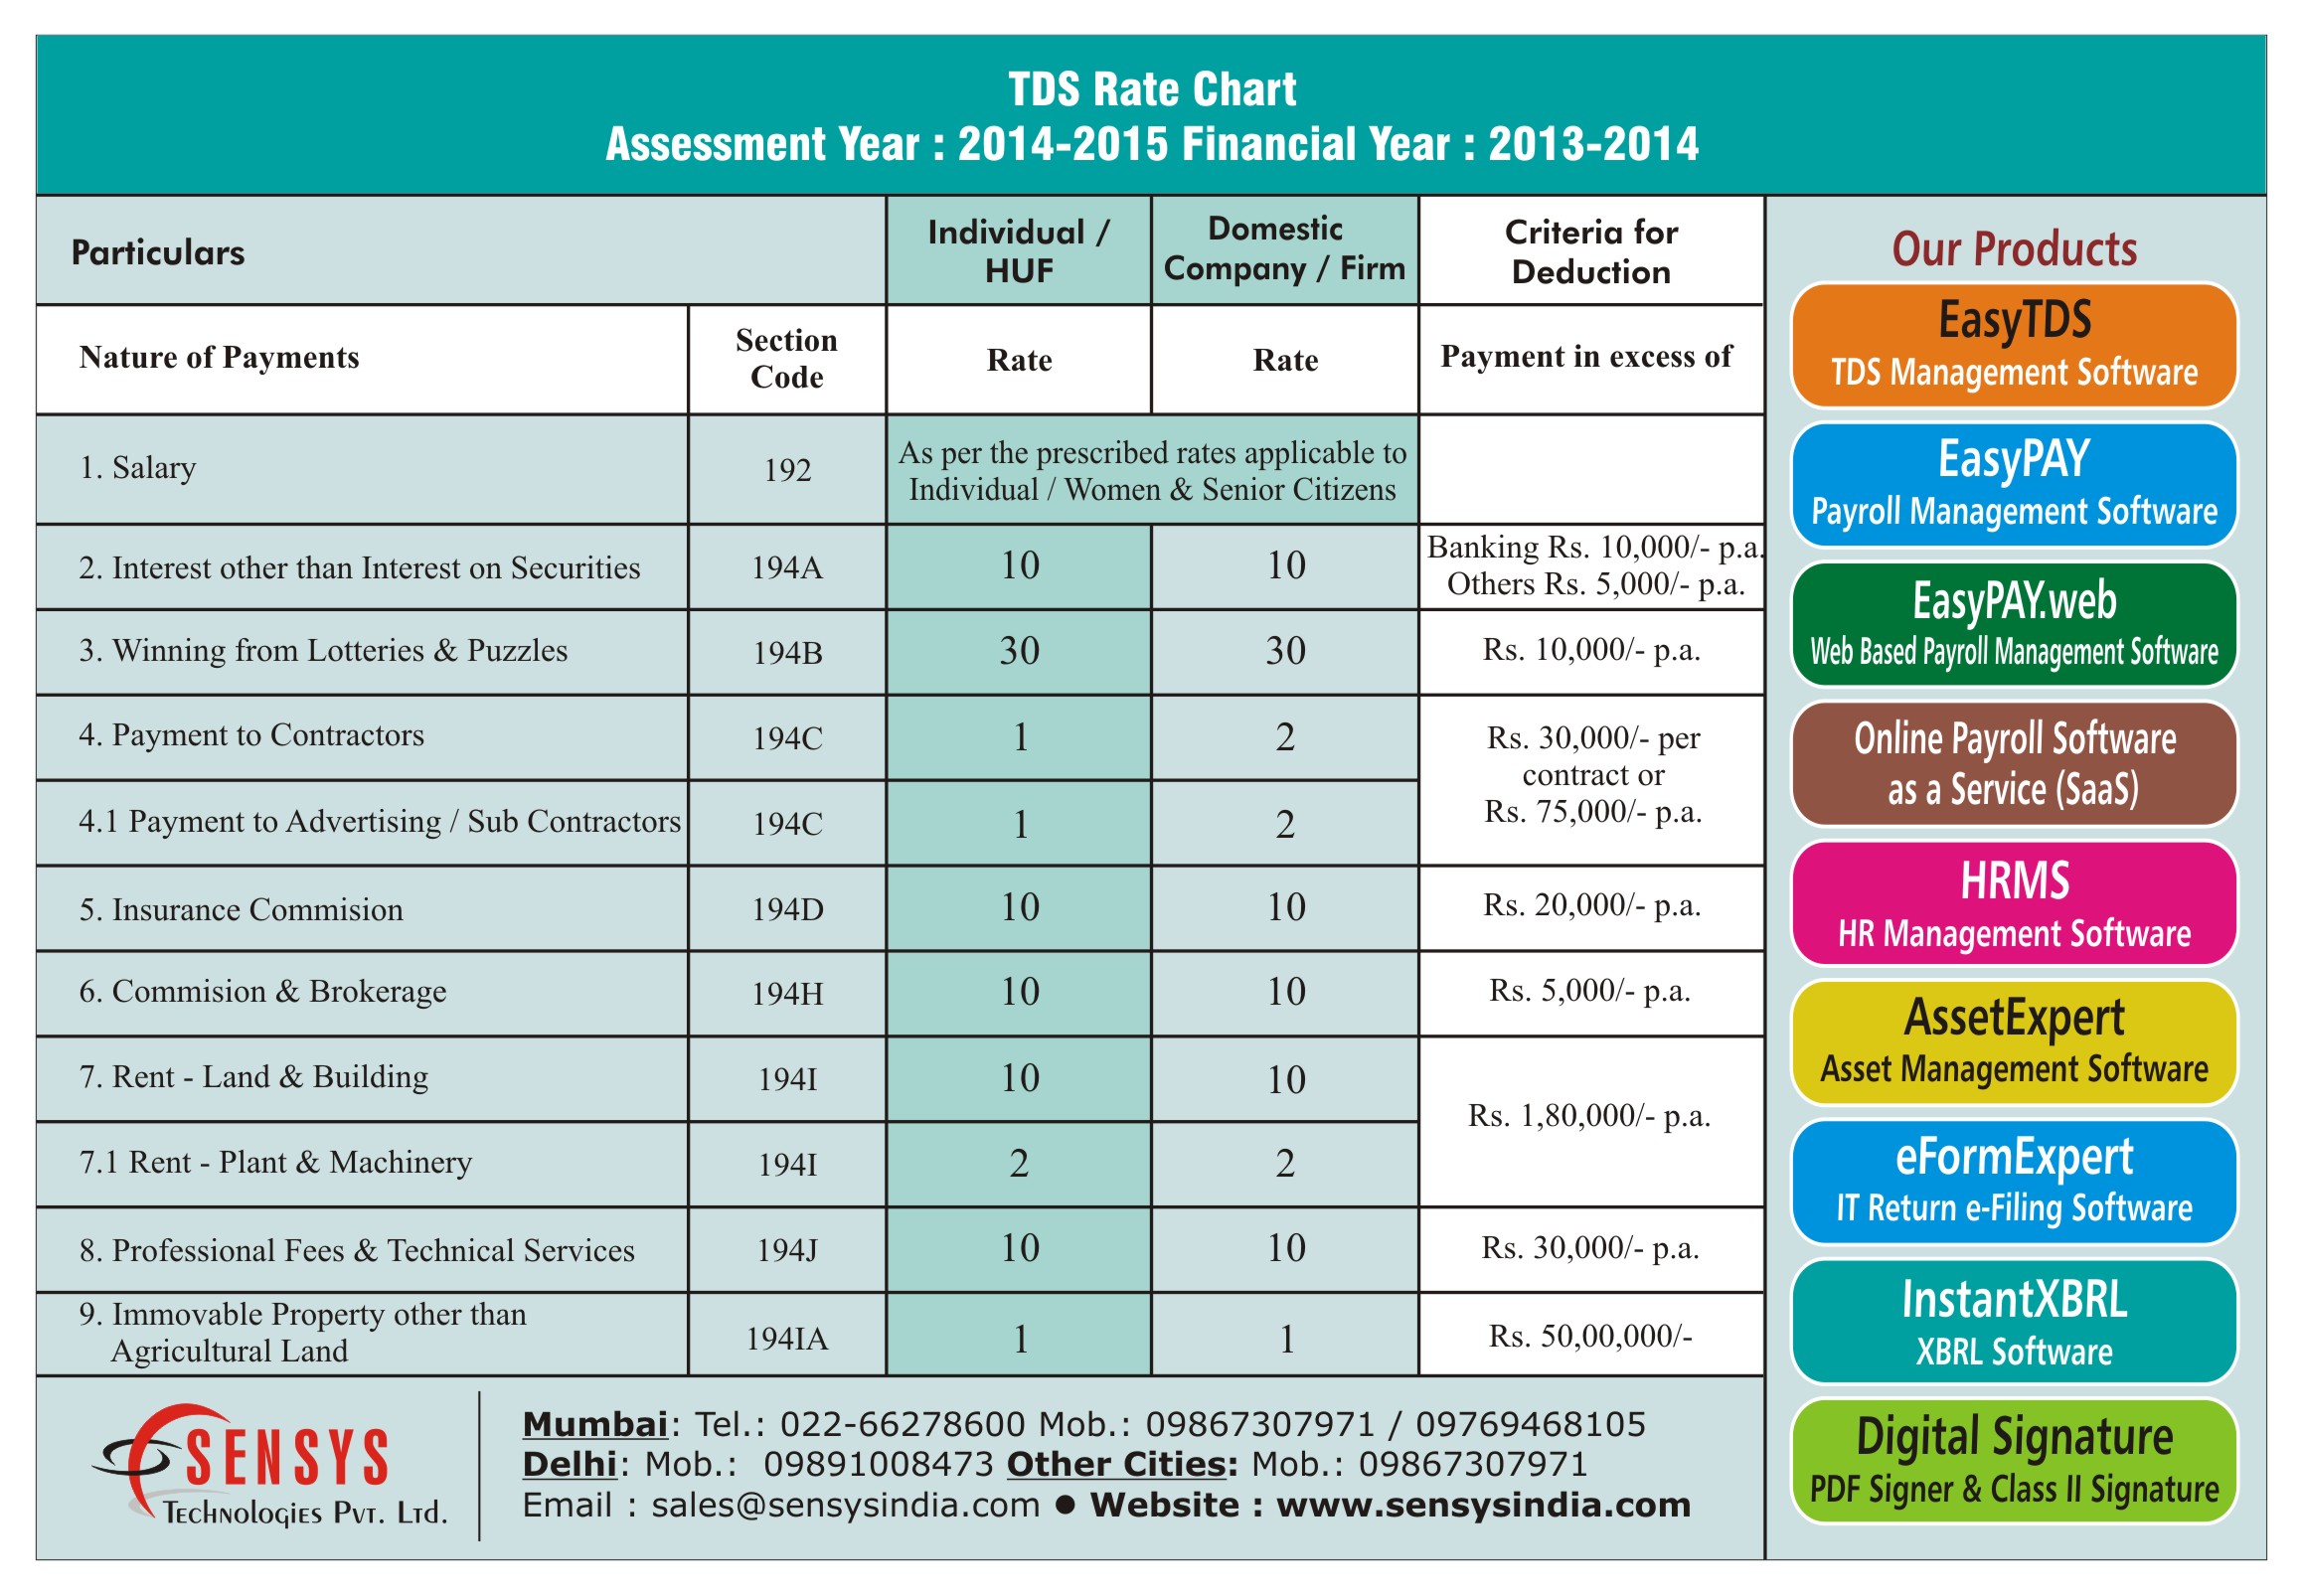 TDS Rate Chart Assessment Year 2014-2015